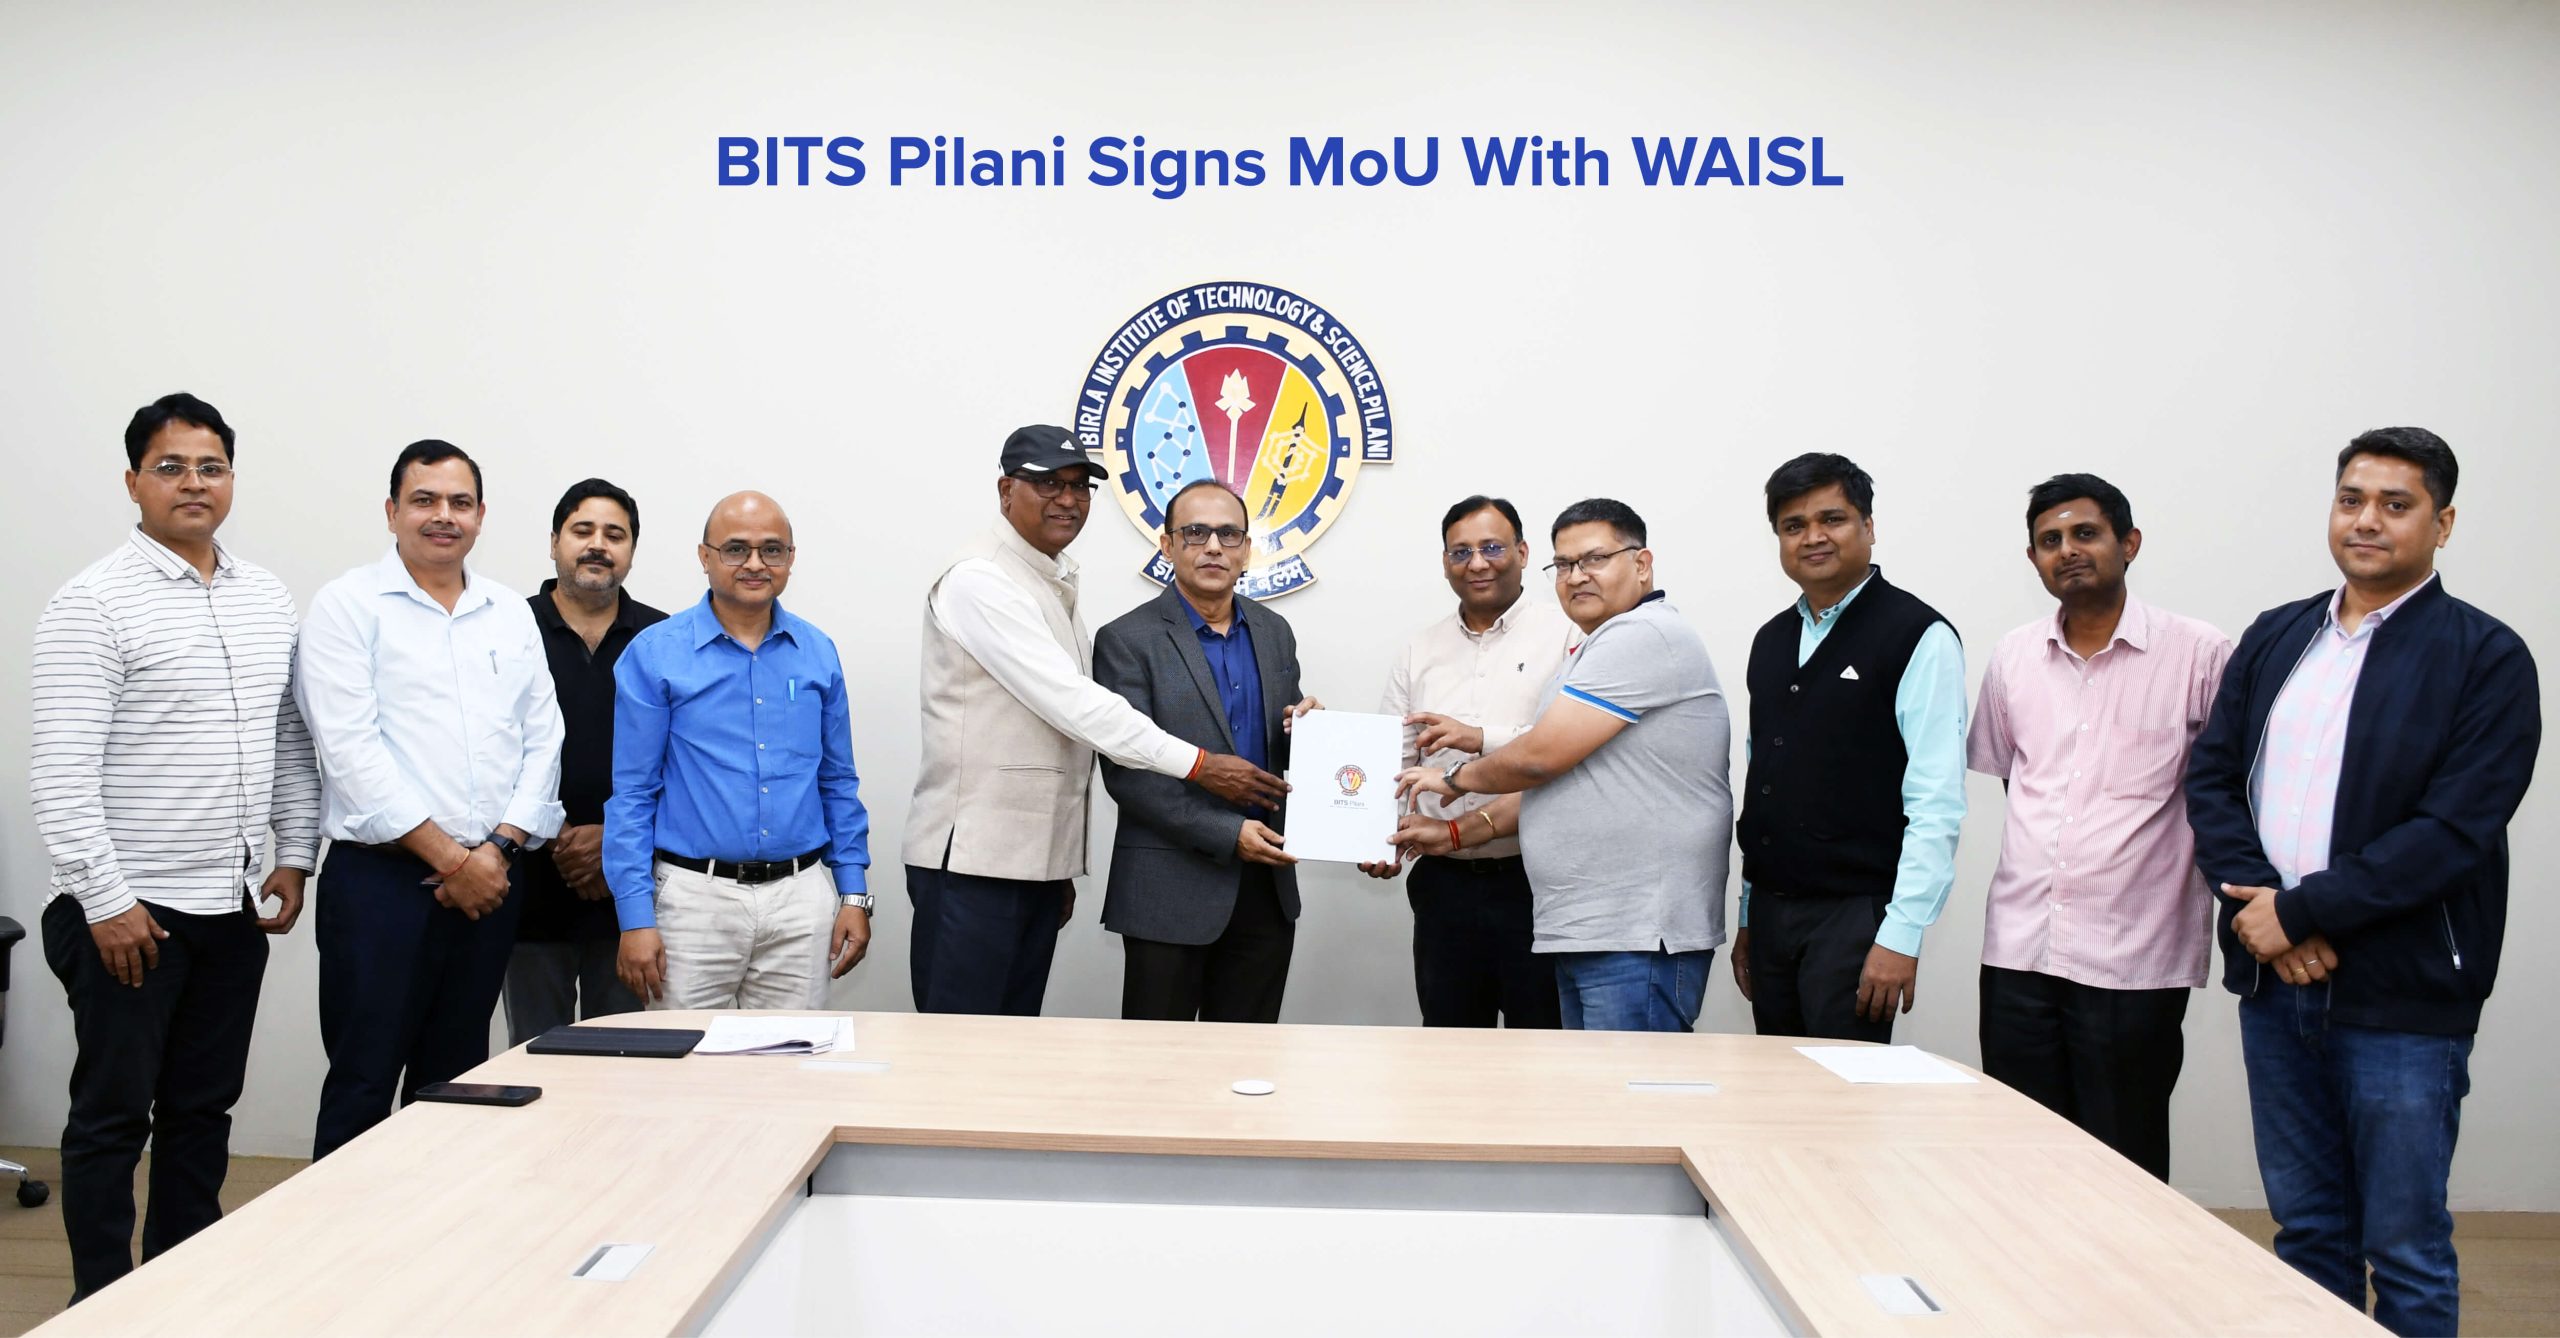 WAISL signs MoU With BITS Pilani, forges dynamic partnership for collaborative innovation